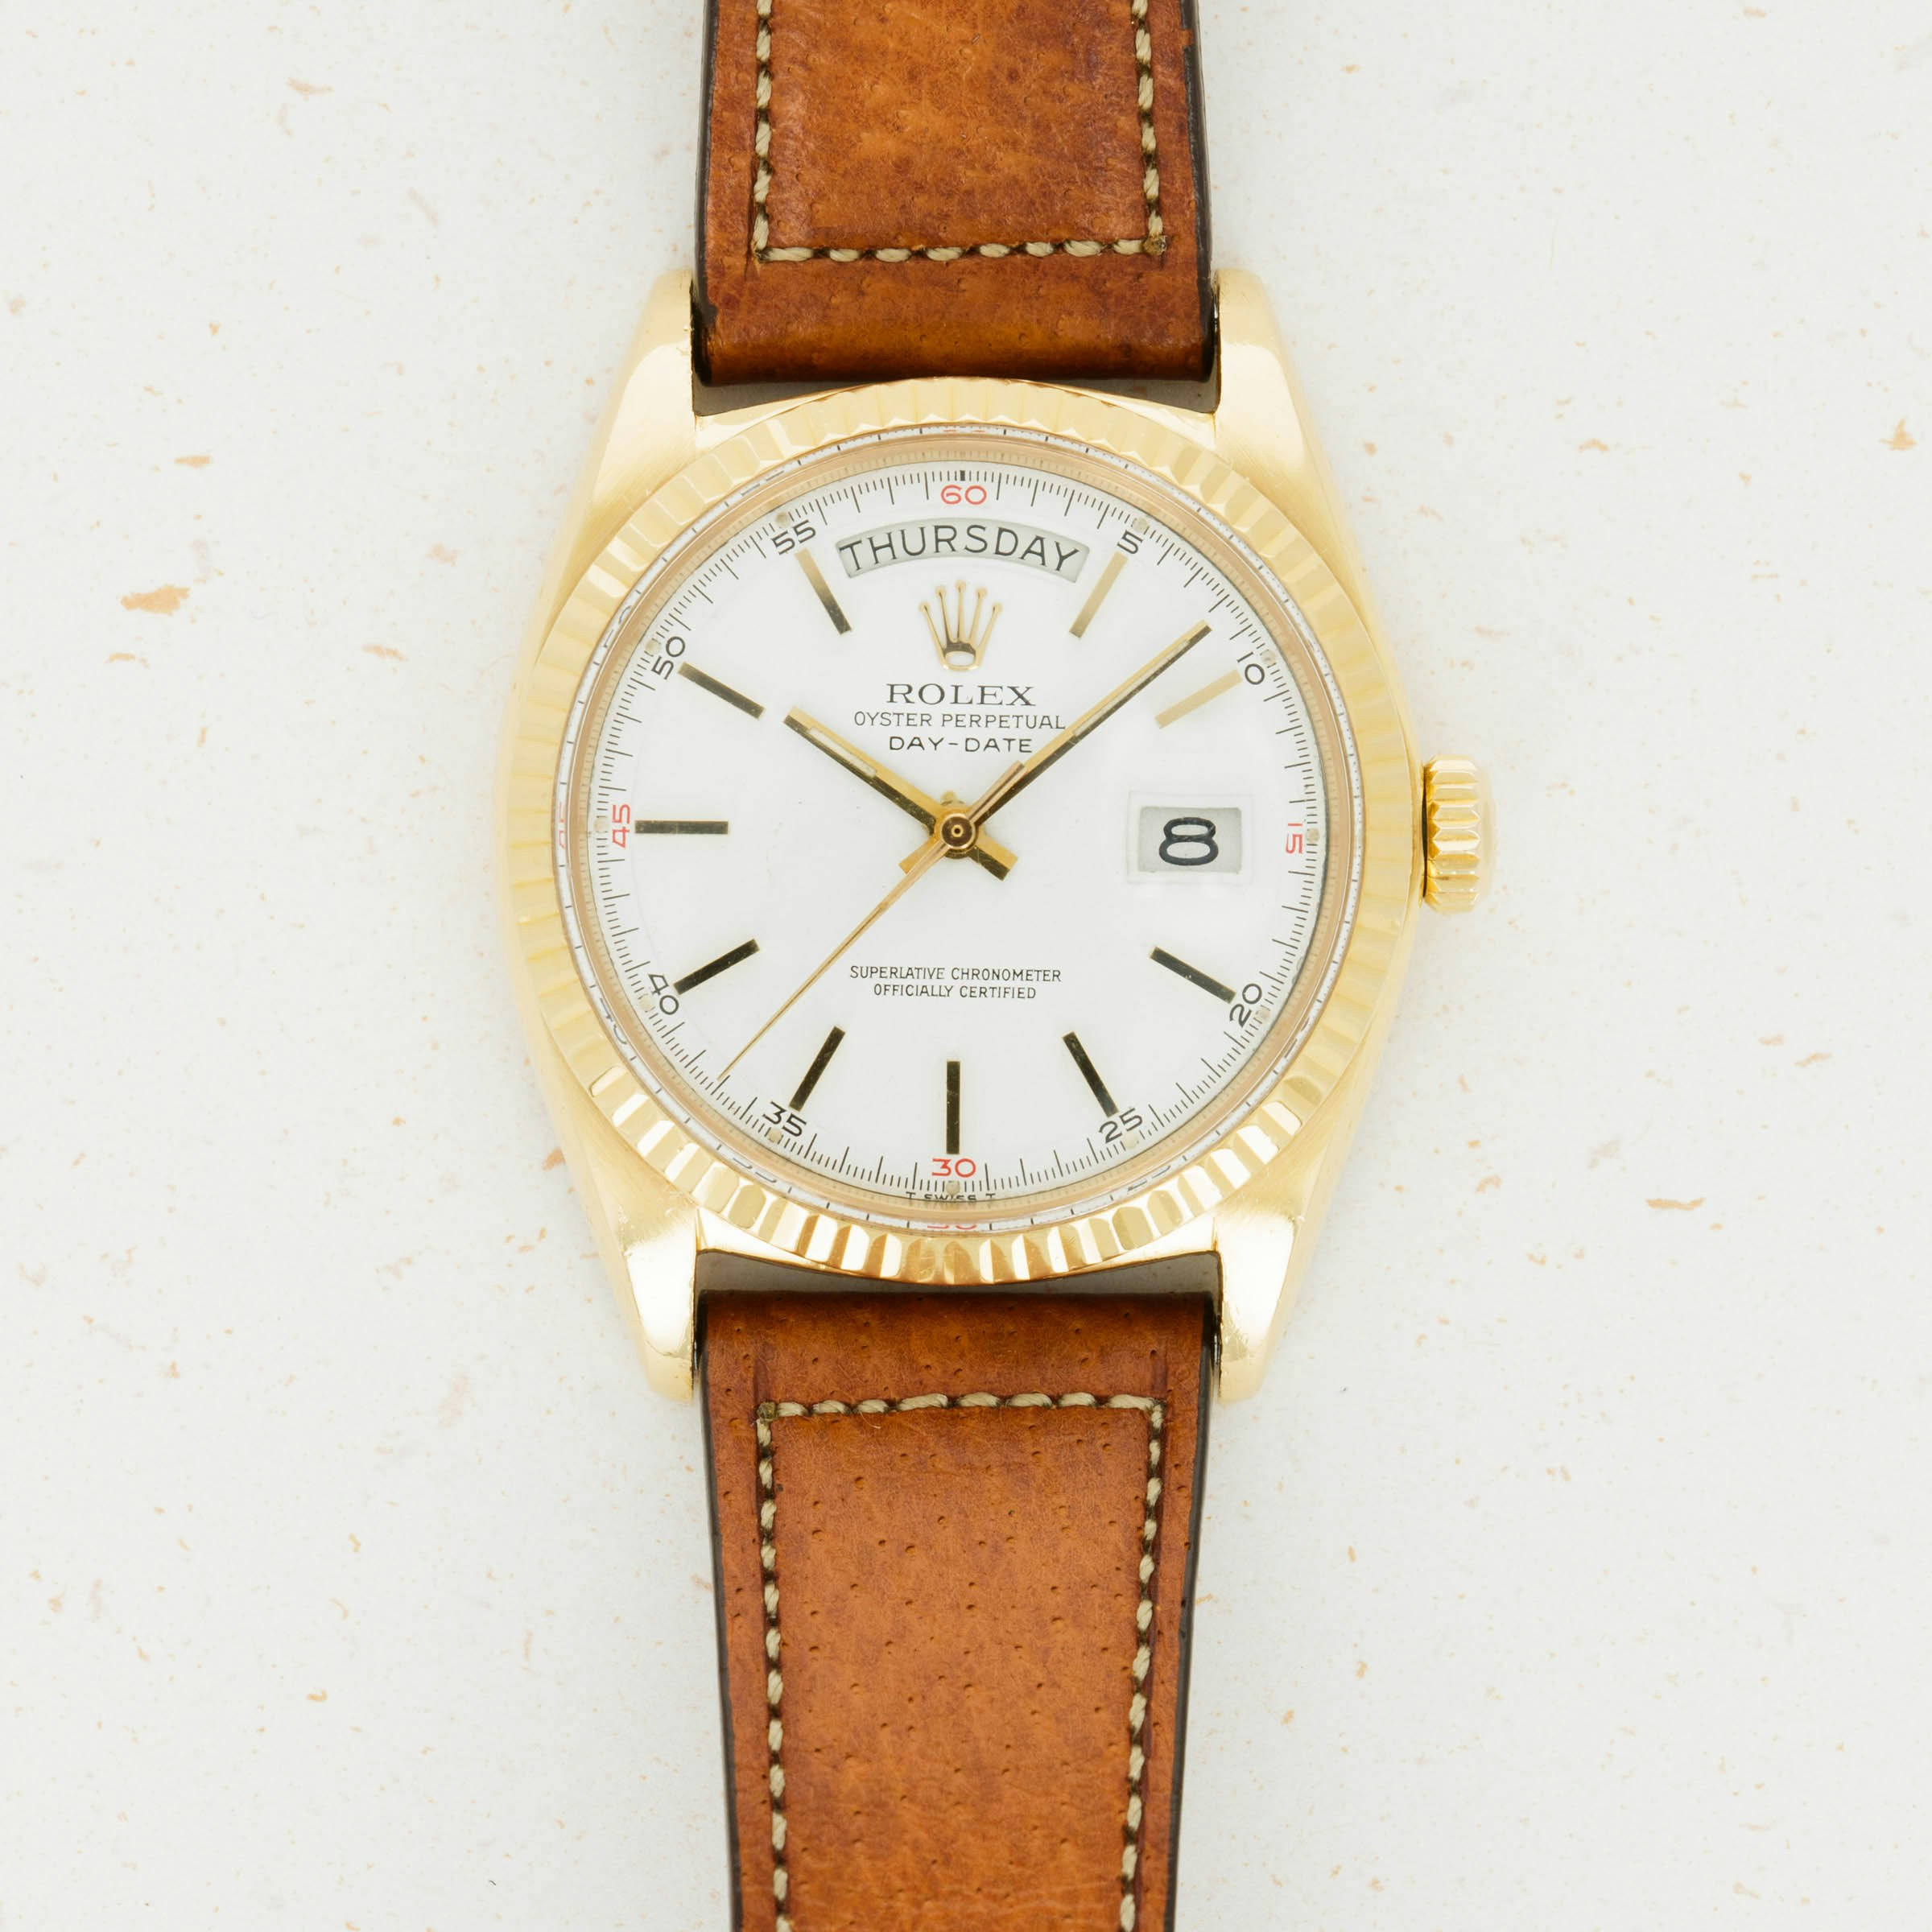 Thumbnail for Rolex Day-Date 1803 Yellow Gold